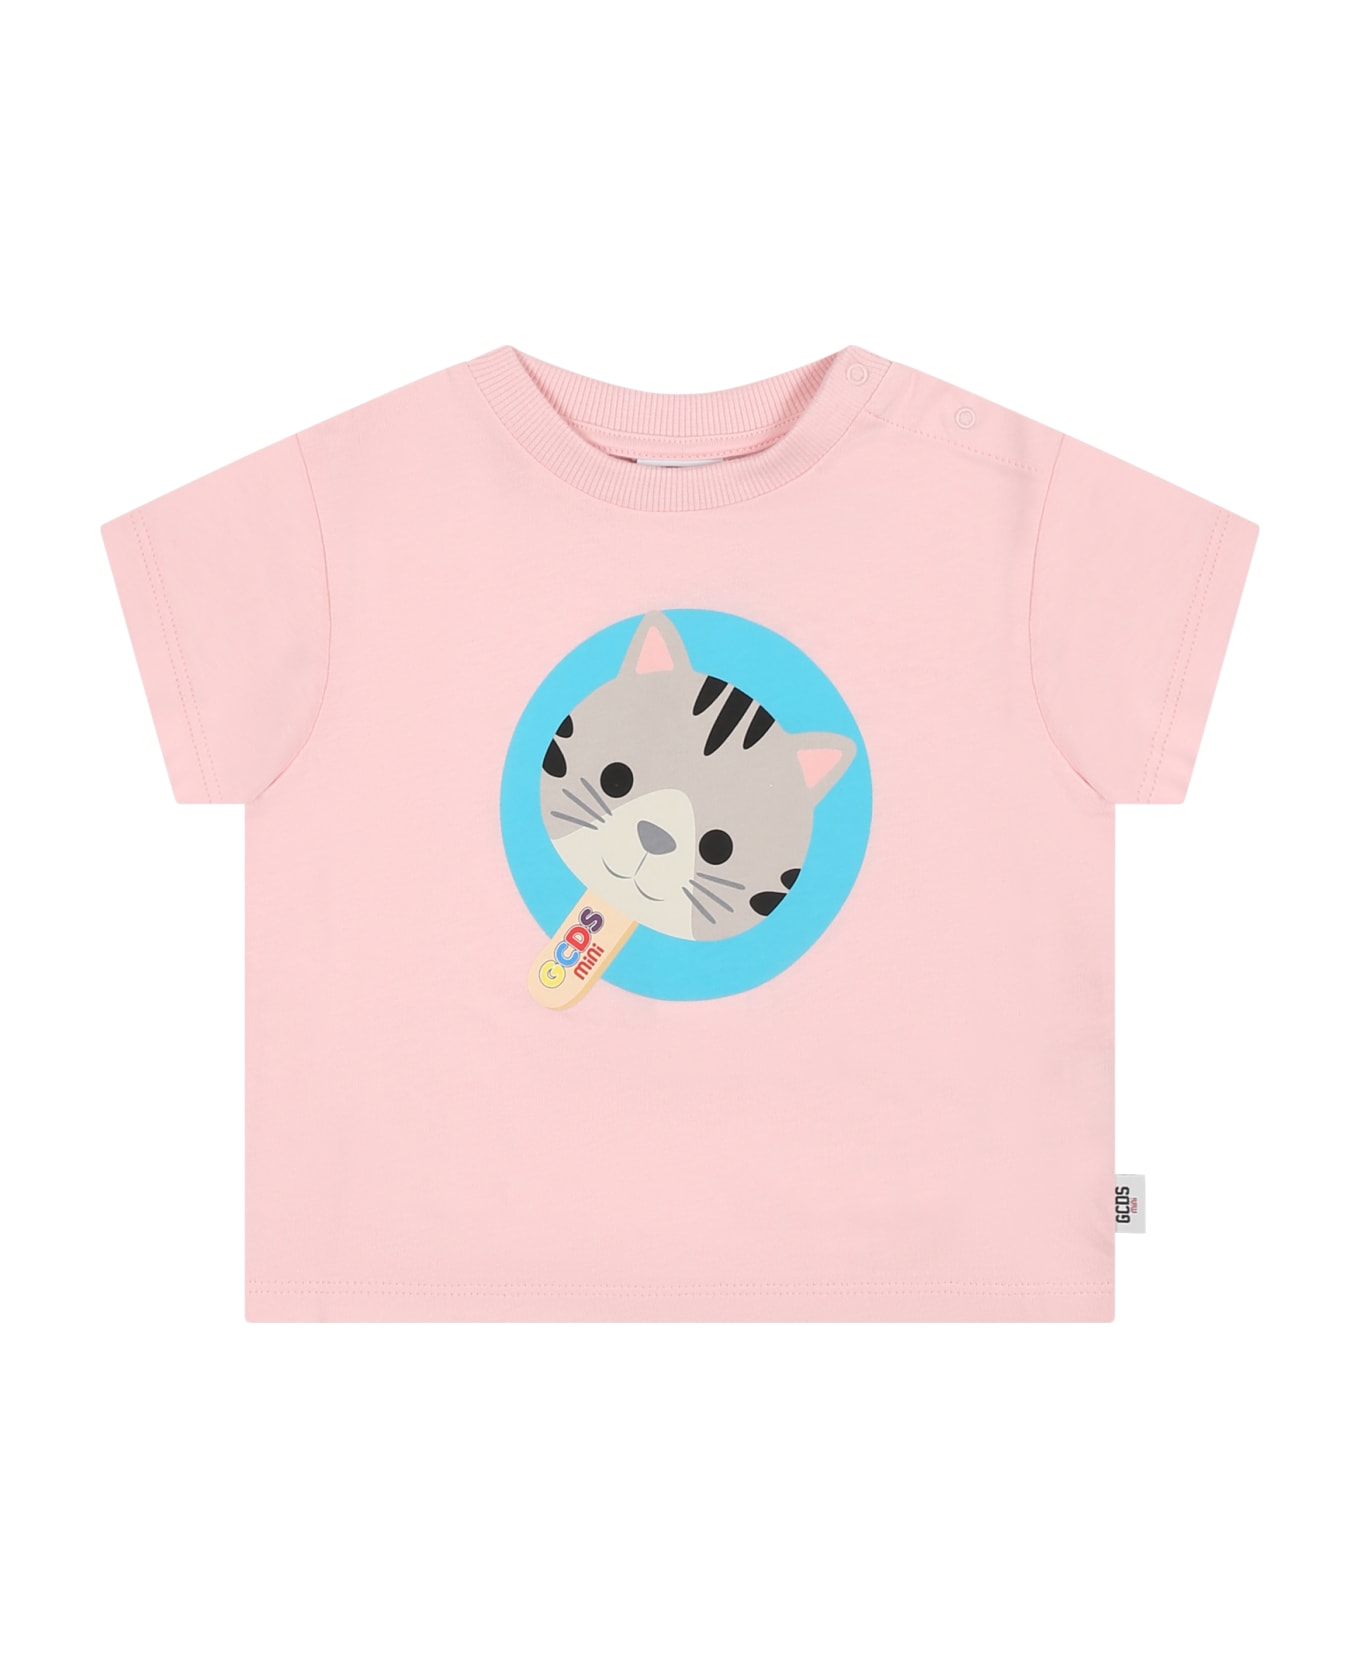 GCDS Mini Pink T-shirt For Baby Girl With Kitten - Pink